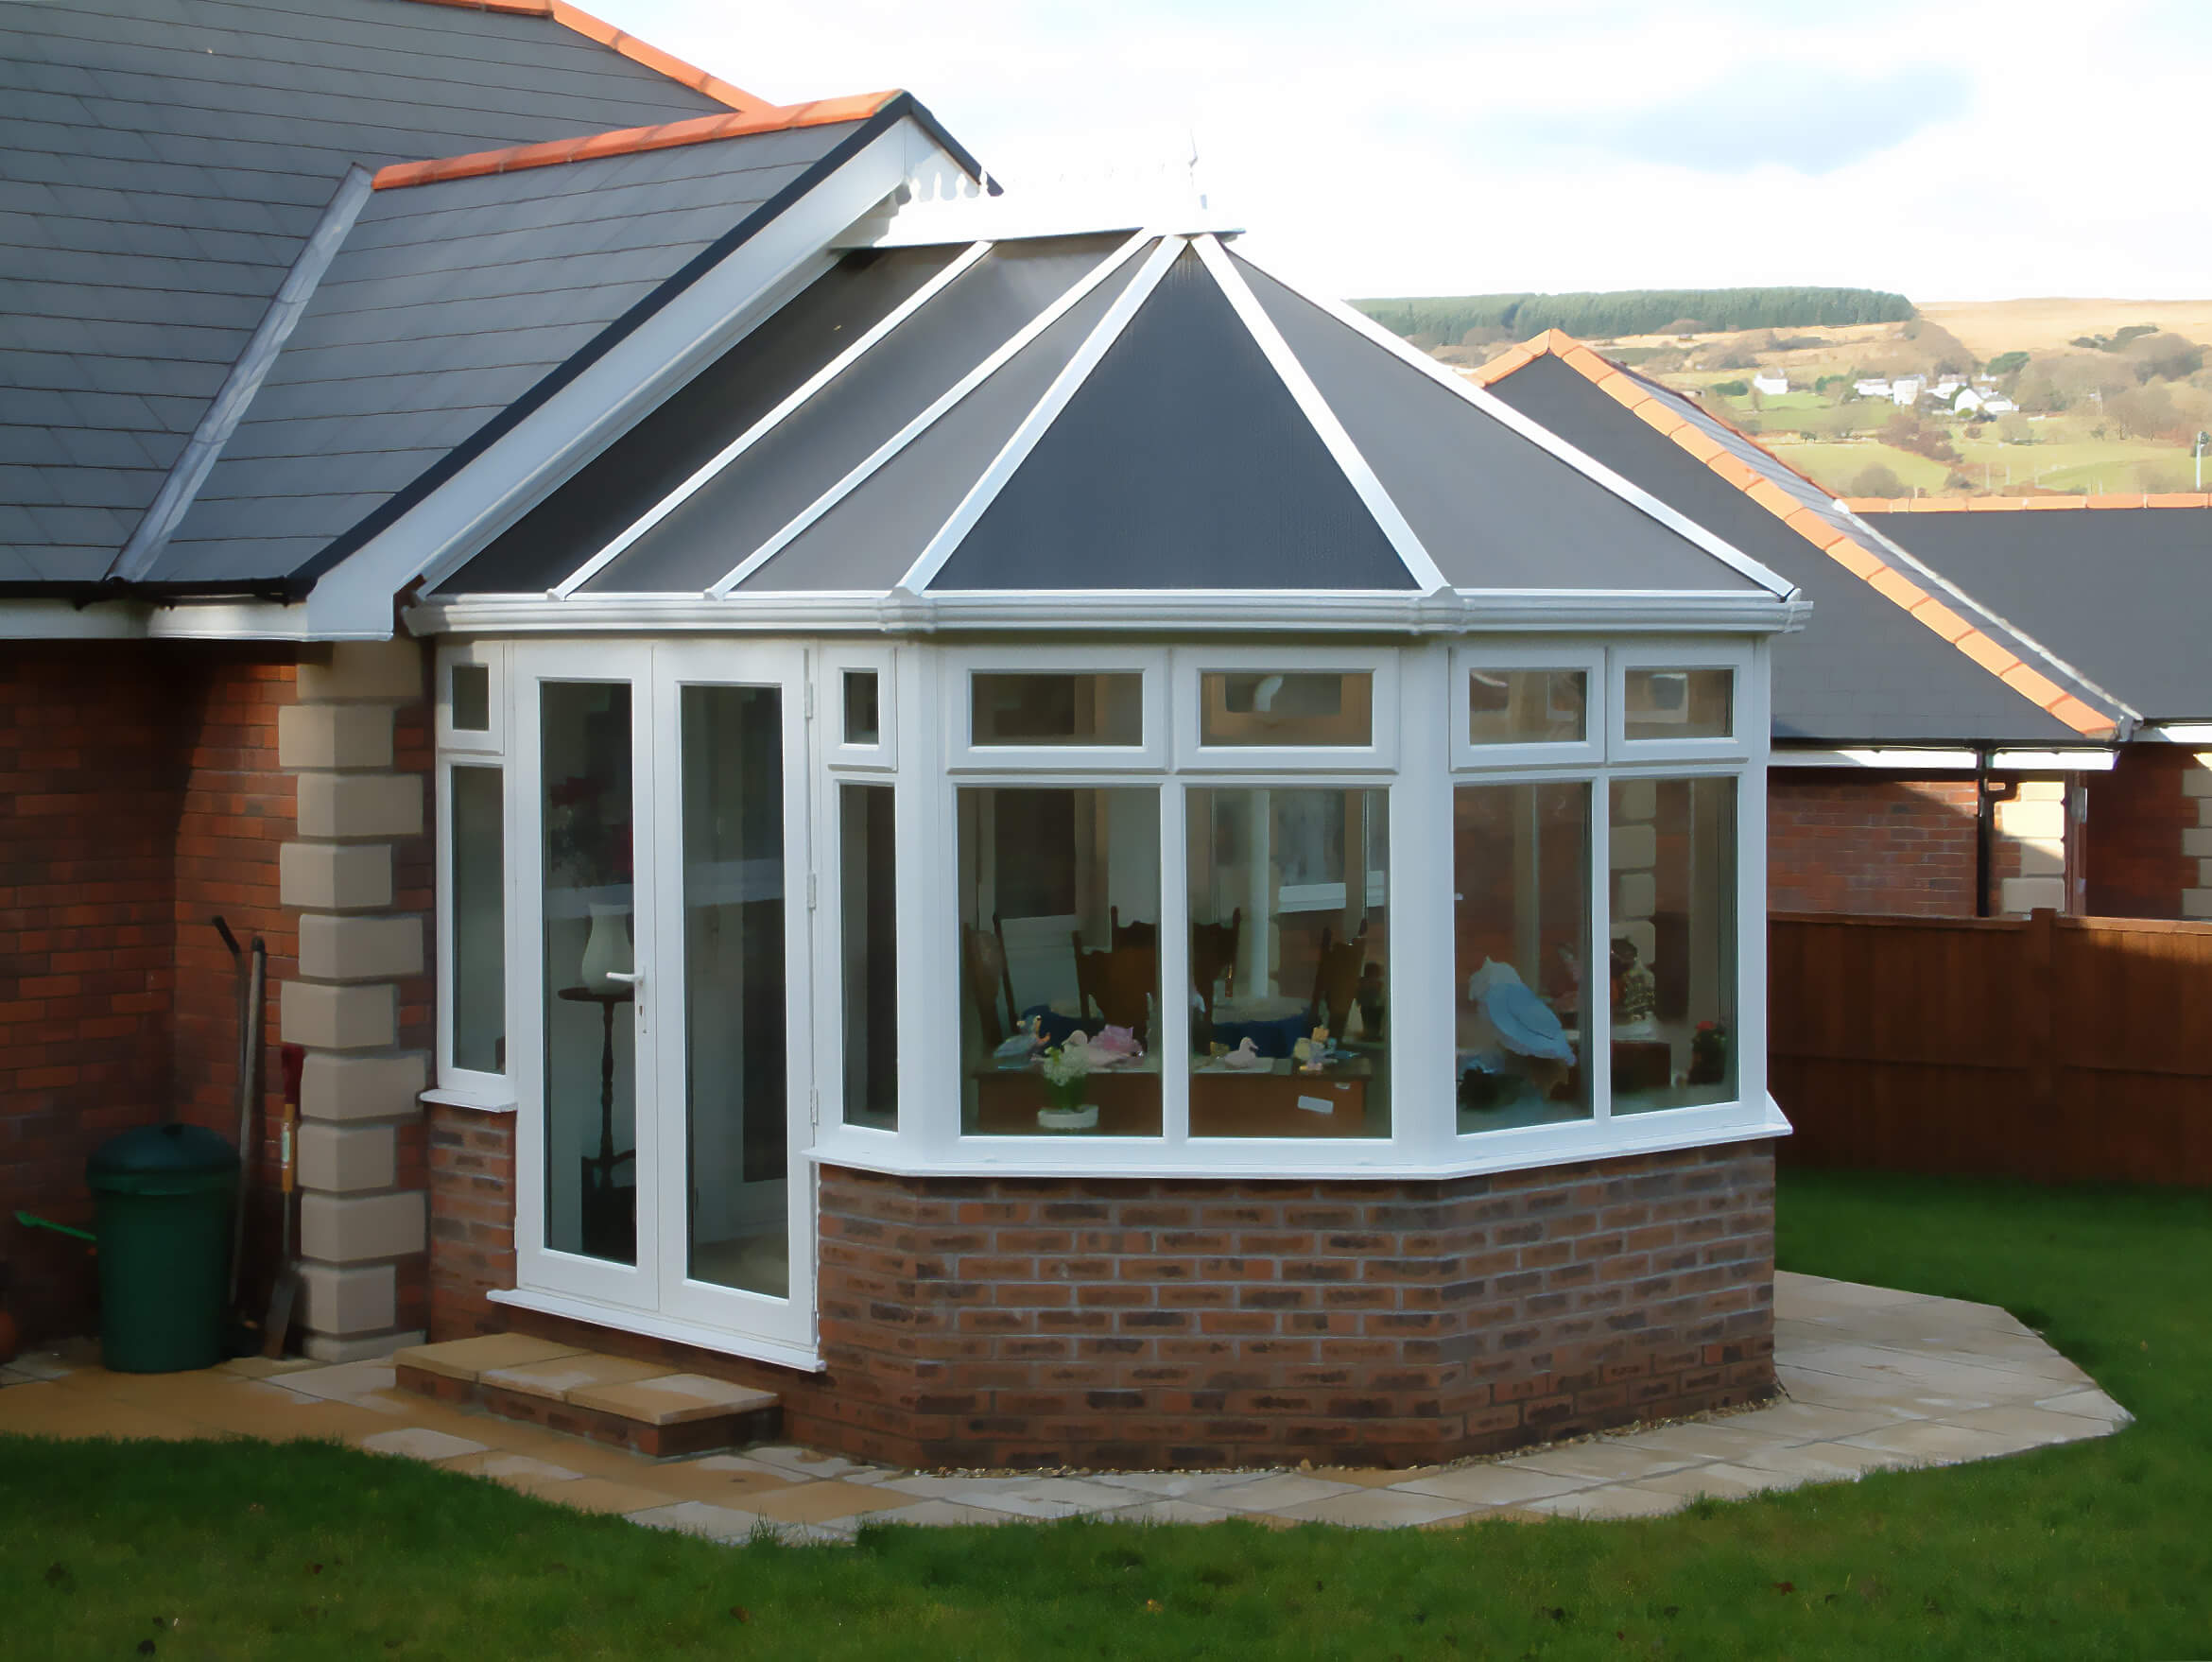 CRS Conservatory Roof Solutions Style Guide